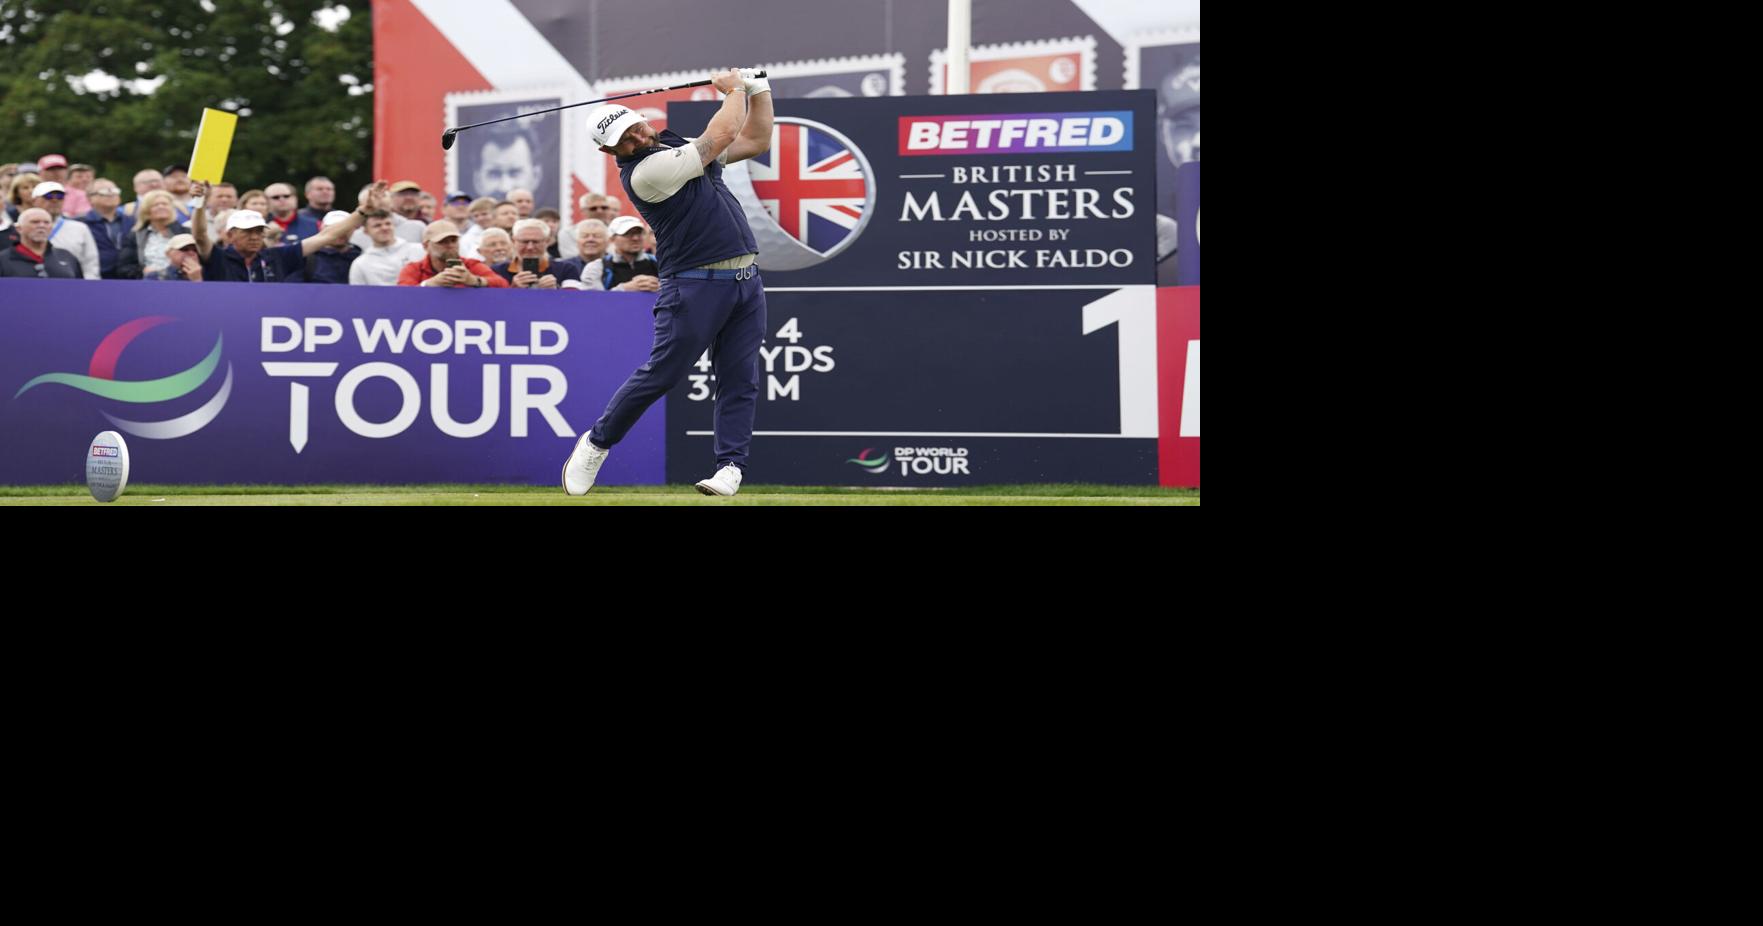 How much money each golfer won at the Betfred British Masters